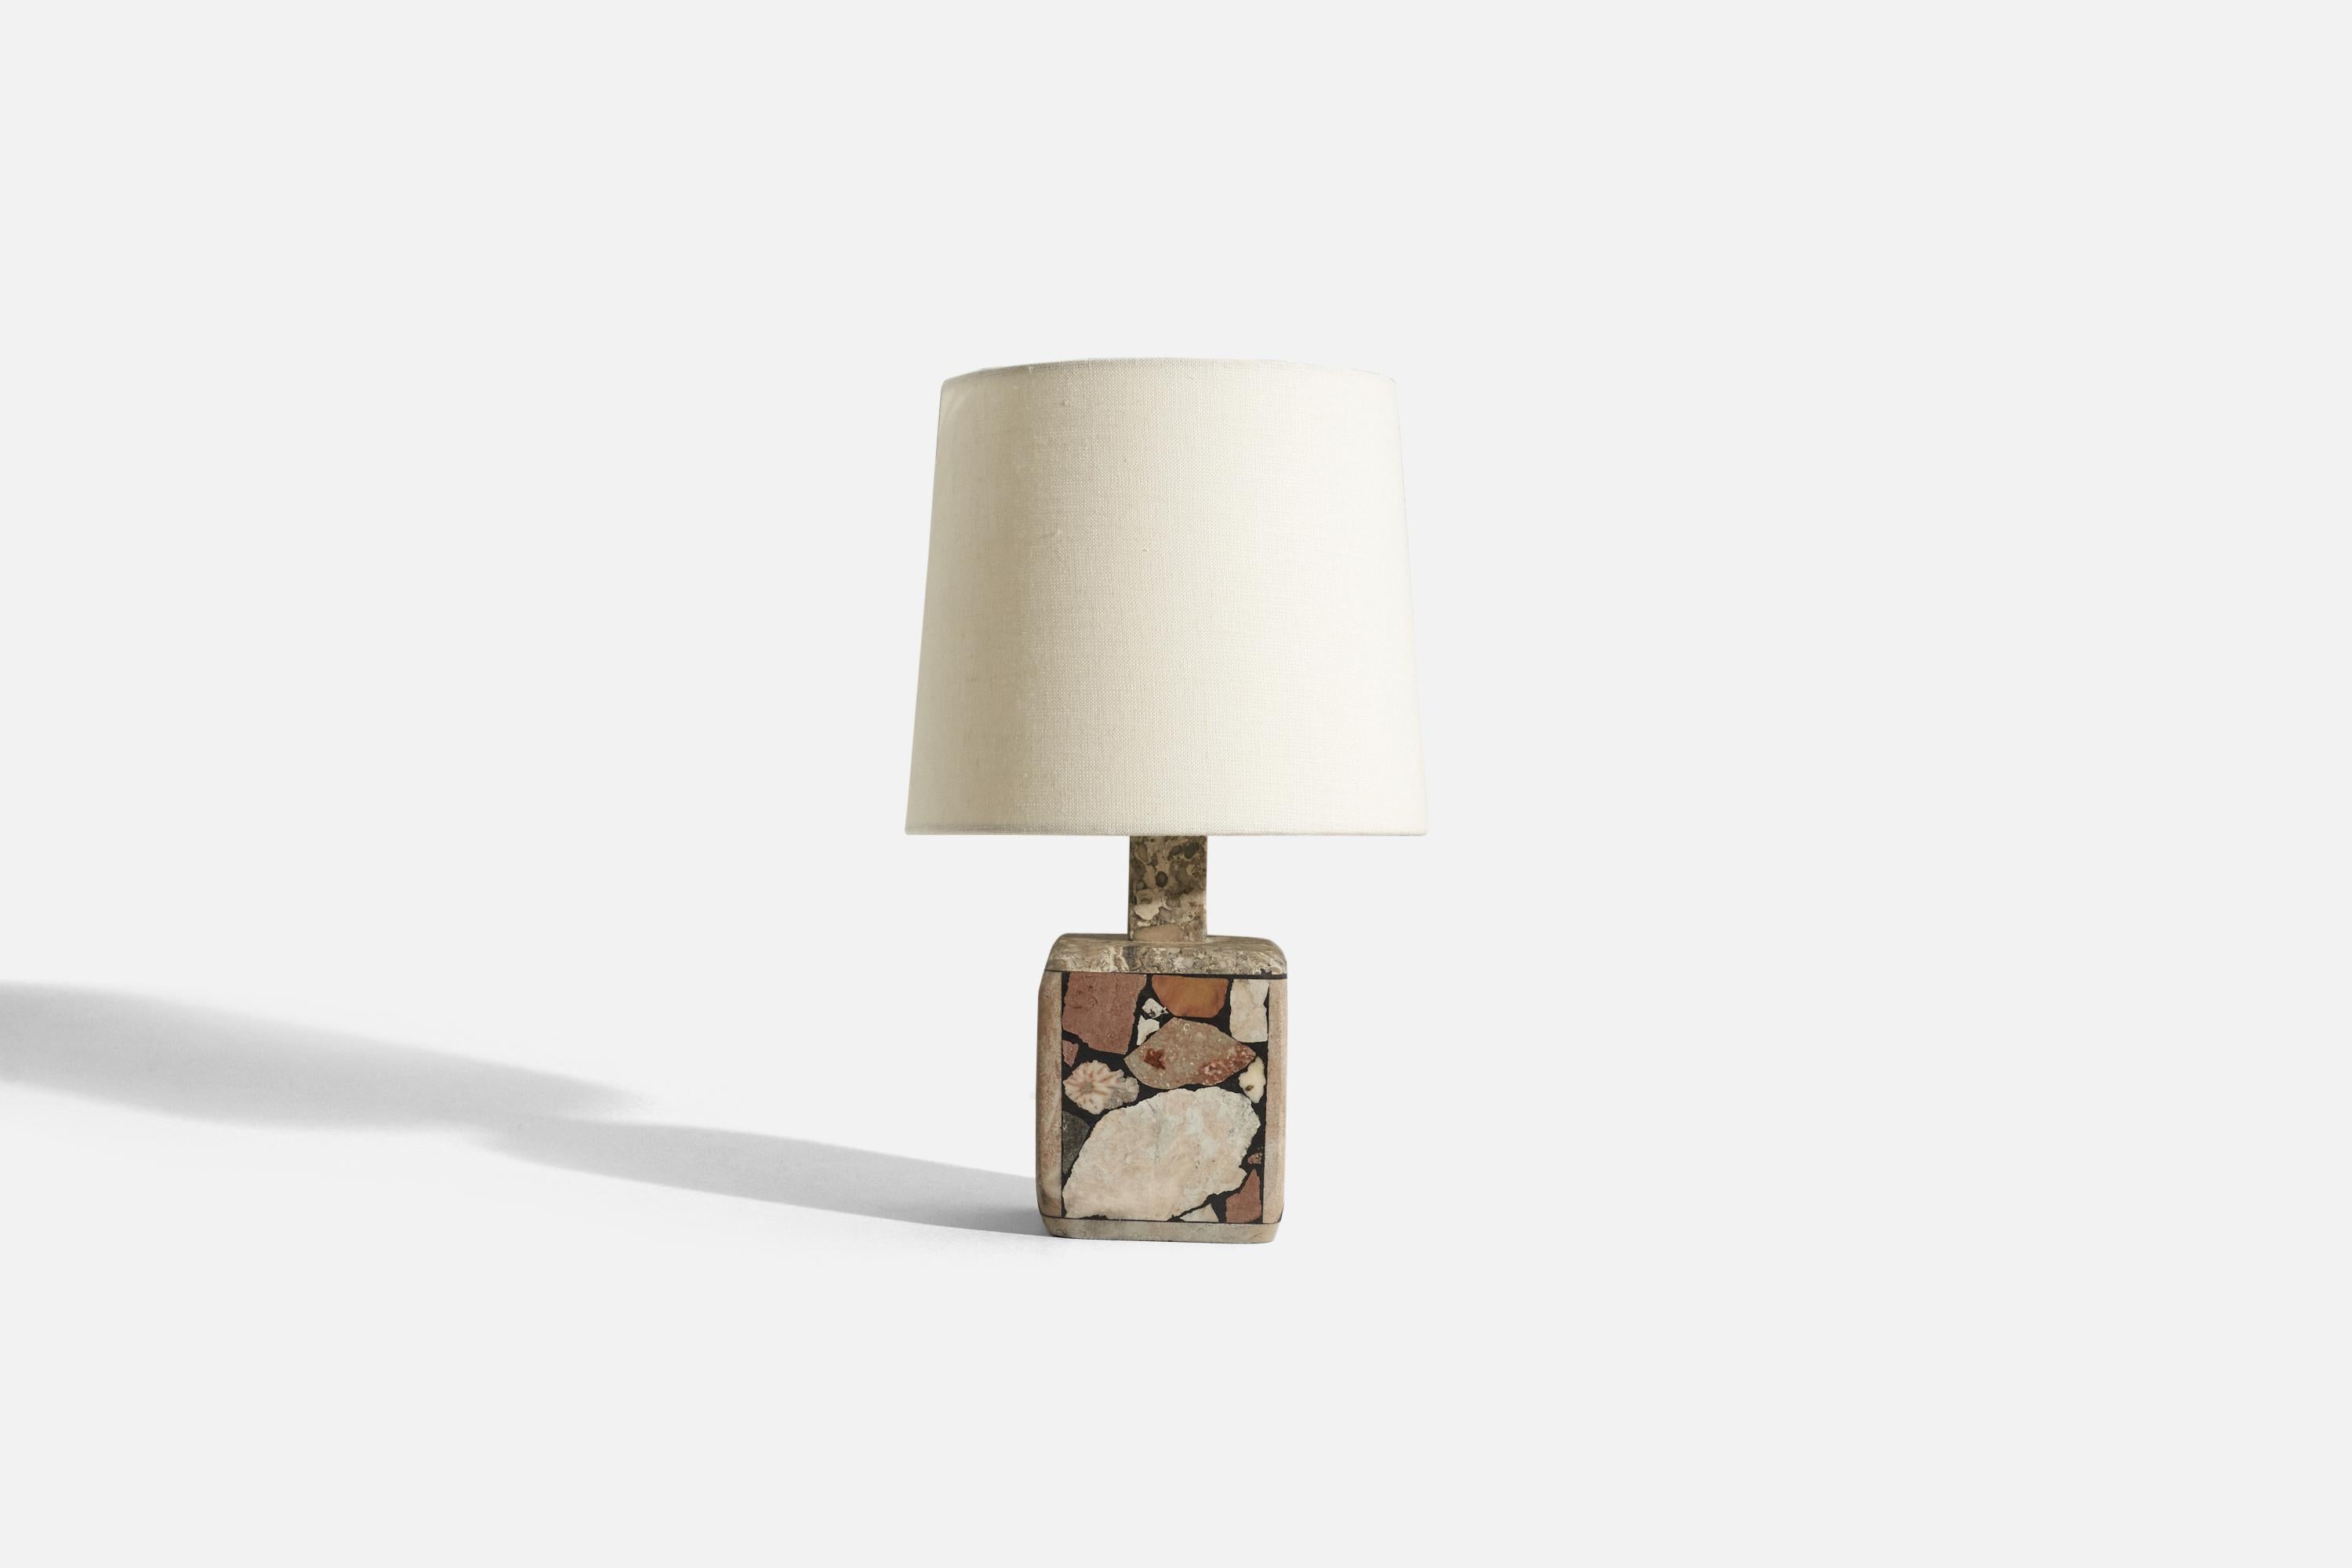 A solid stone table lamp with fossil pieces, Pietra Dura technique, designed and produced in Sweden, c. 1970s.

Sold without lampshade. 
Dimensions of Lamp (inches) : 8.9375 x 3.875 x 3.875 (H x W x D)
Dimensions of Shade (inches) : 7 x 8 x 7 (T